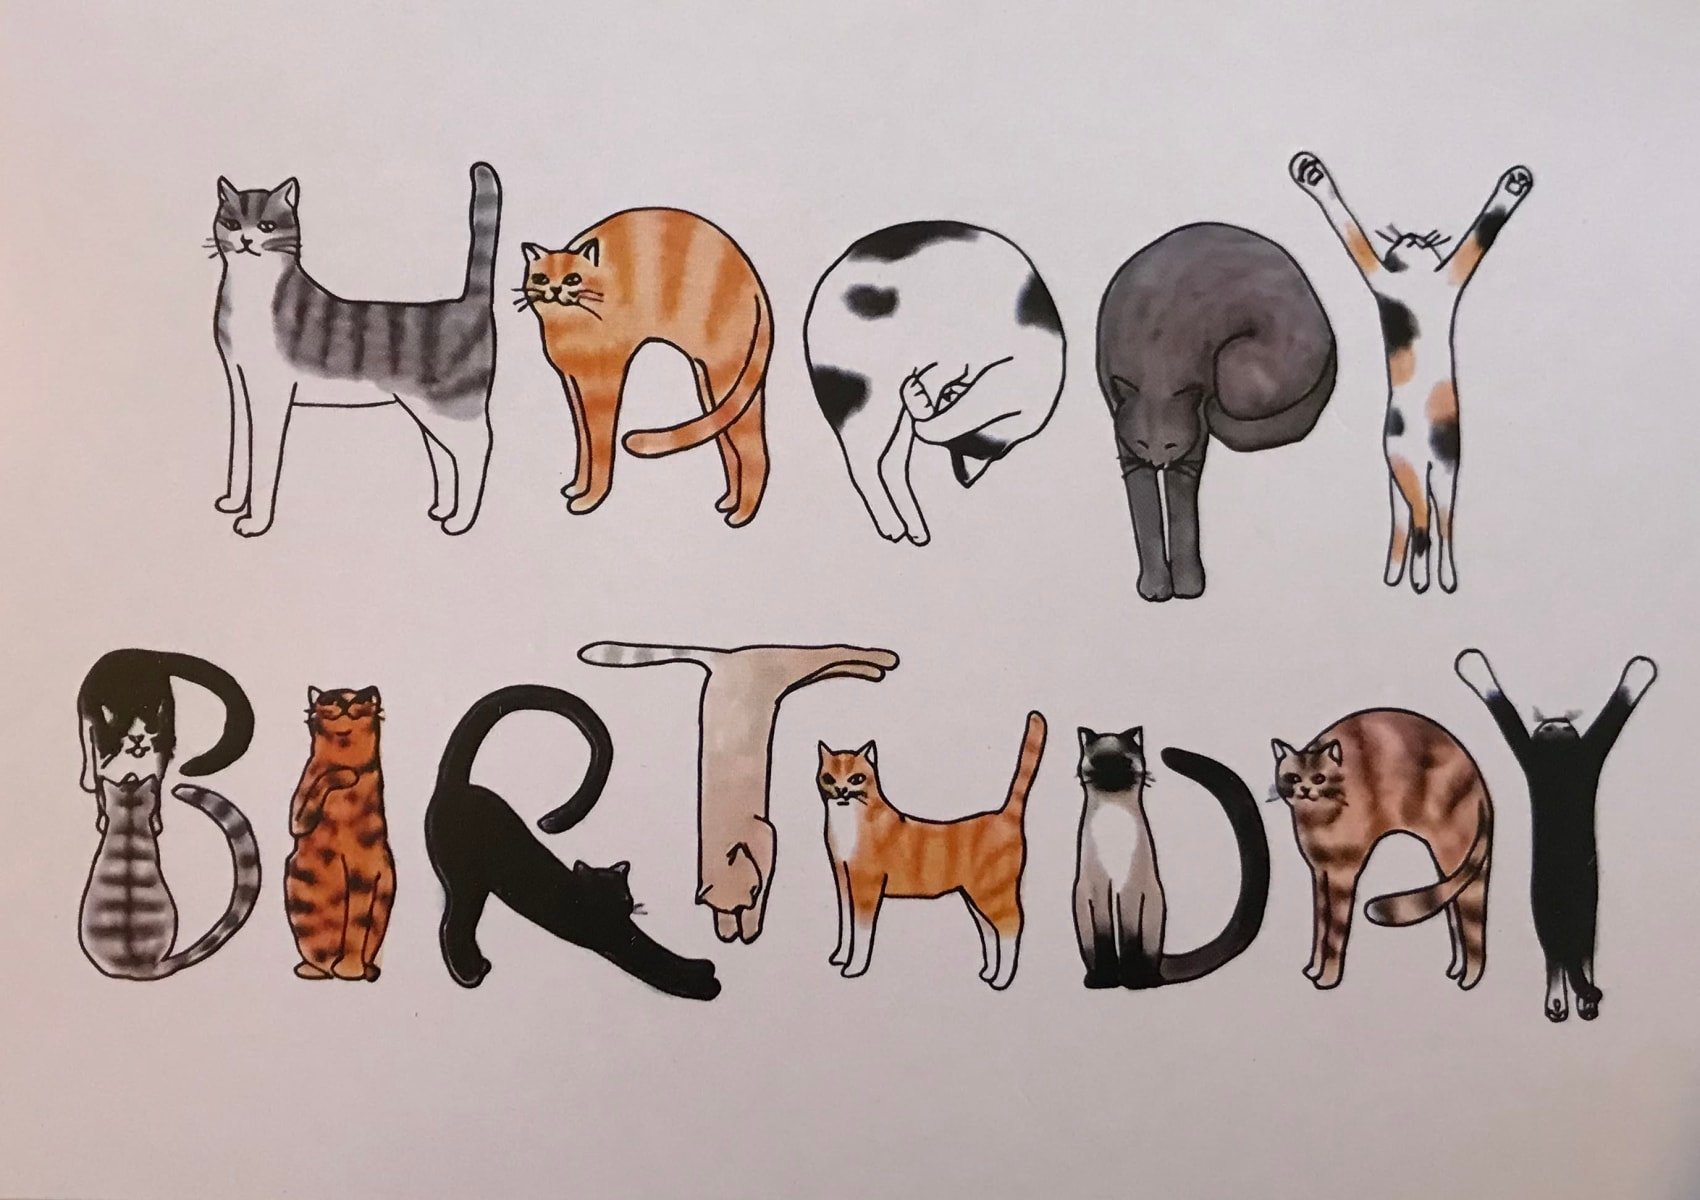 Happy birthday card with acrobatic cats making the letters